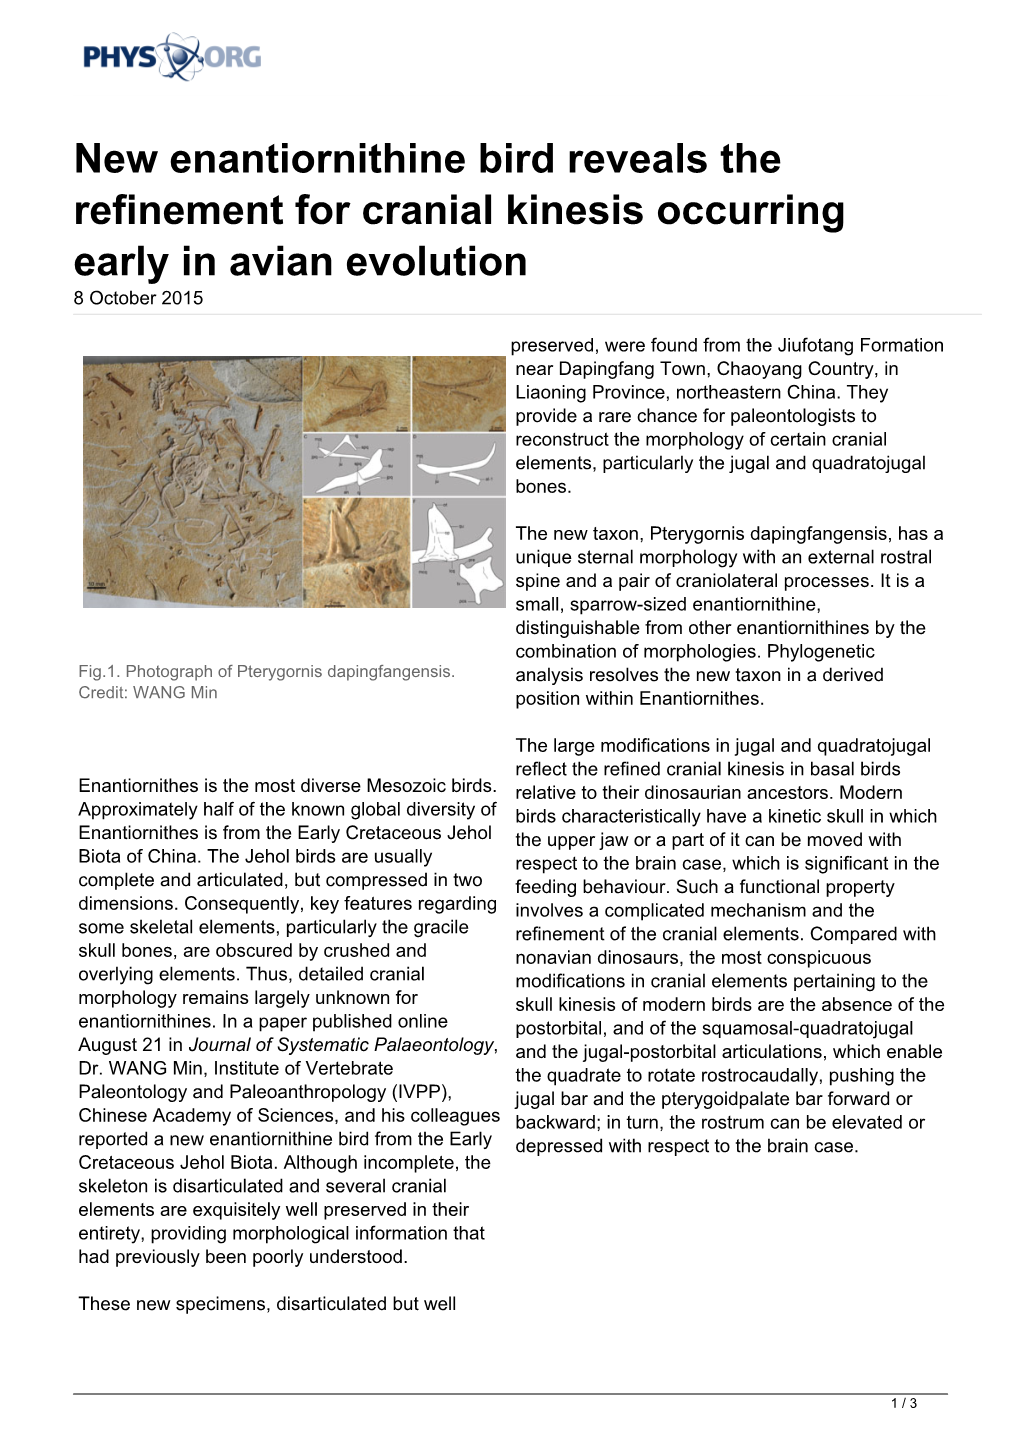 New Enantiornithine Bird Reveals the Refinement for Cranial Kinesis Occurring Early in Avian Evolution 8 October 2015